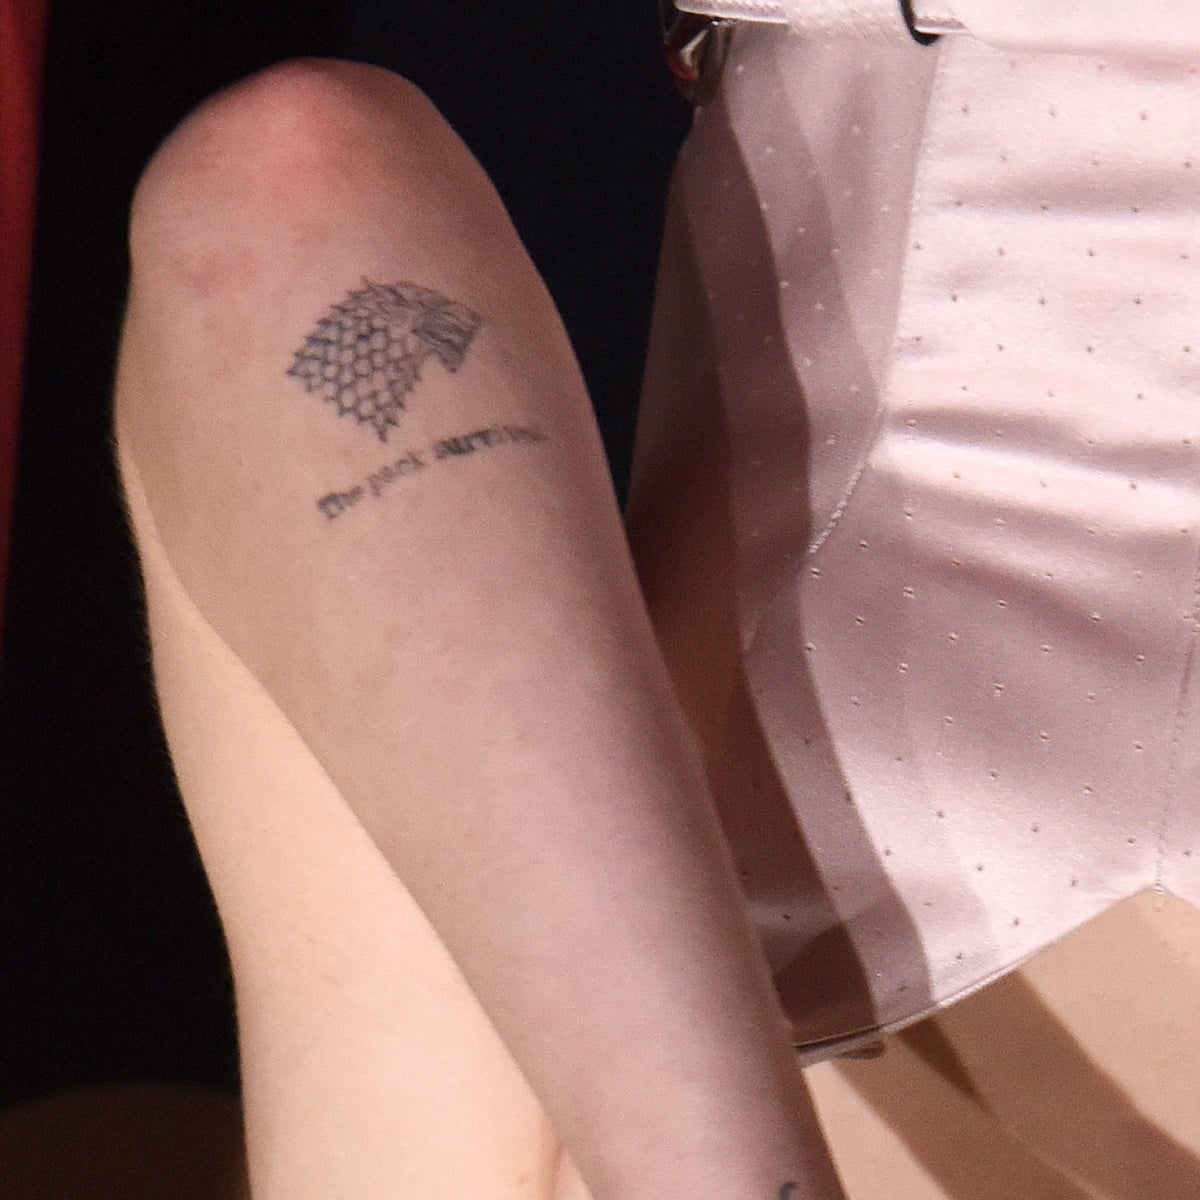 Sophie Turner decided to get a tattoo on her left arm in 2018 as a tribute to her character Sansa Stark and the Stark family's motto, "The pack survives"